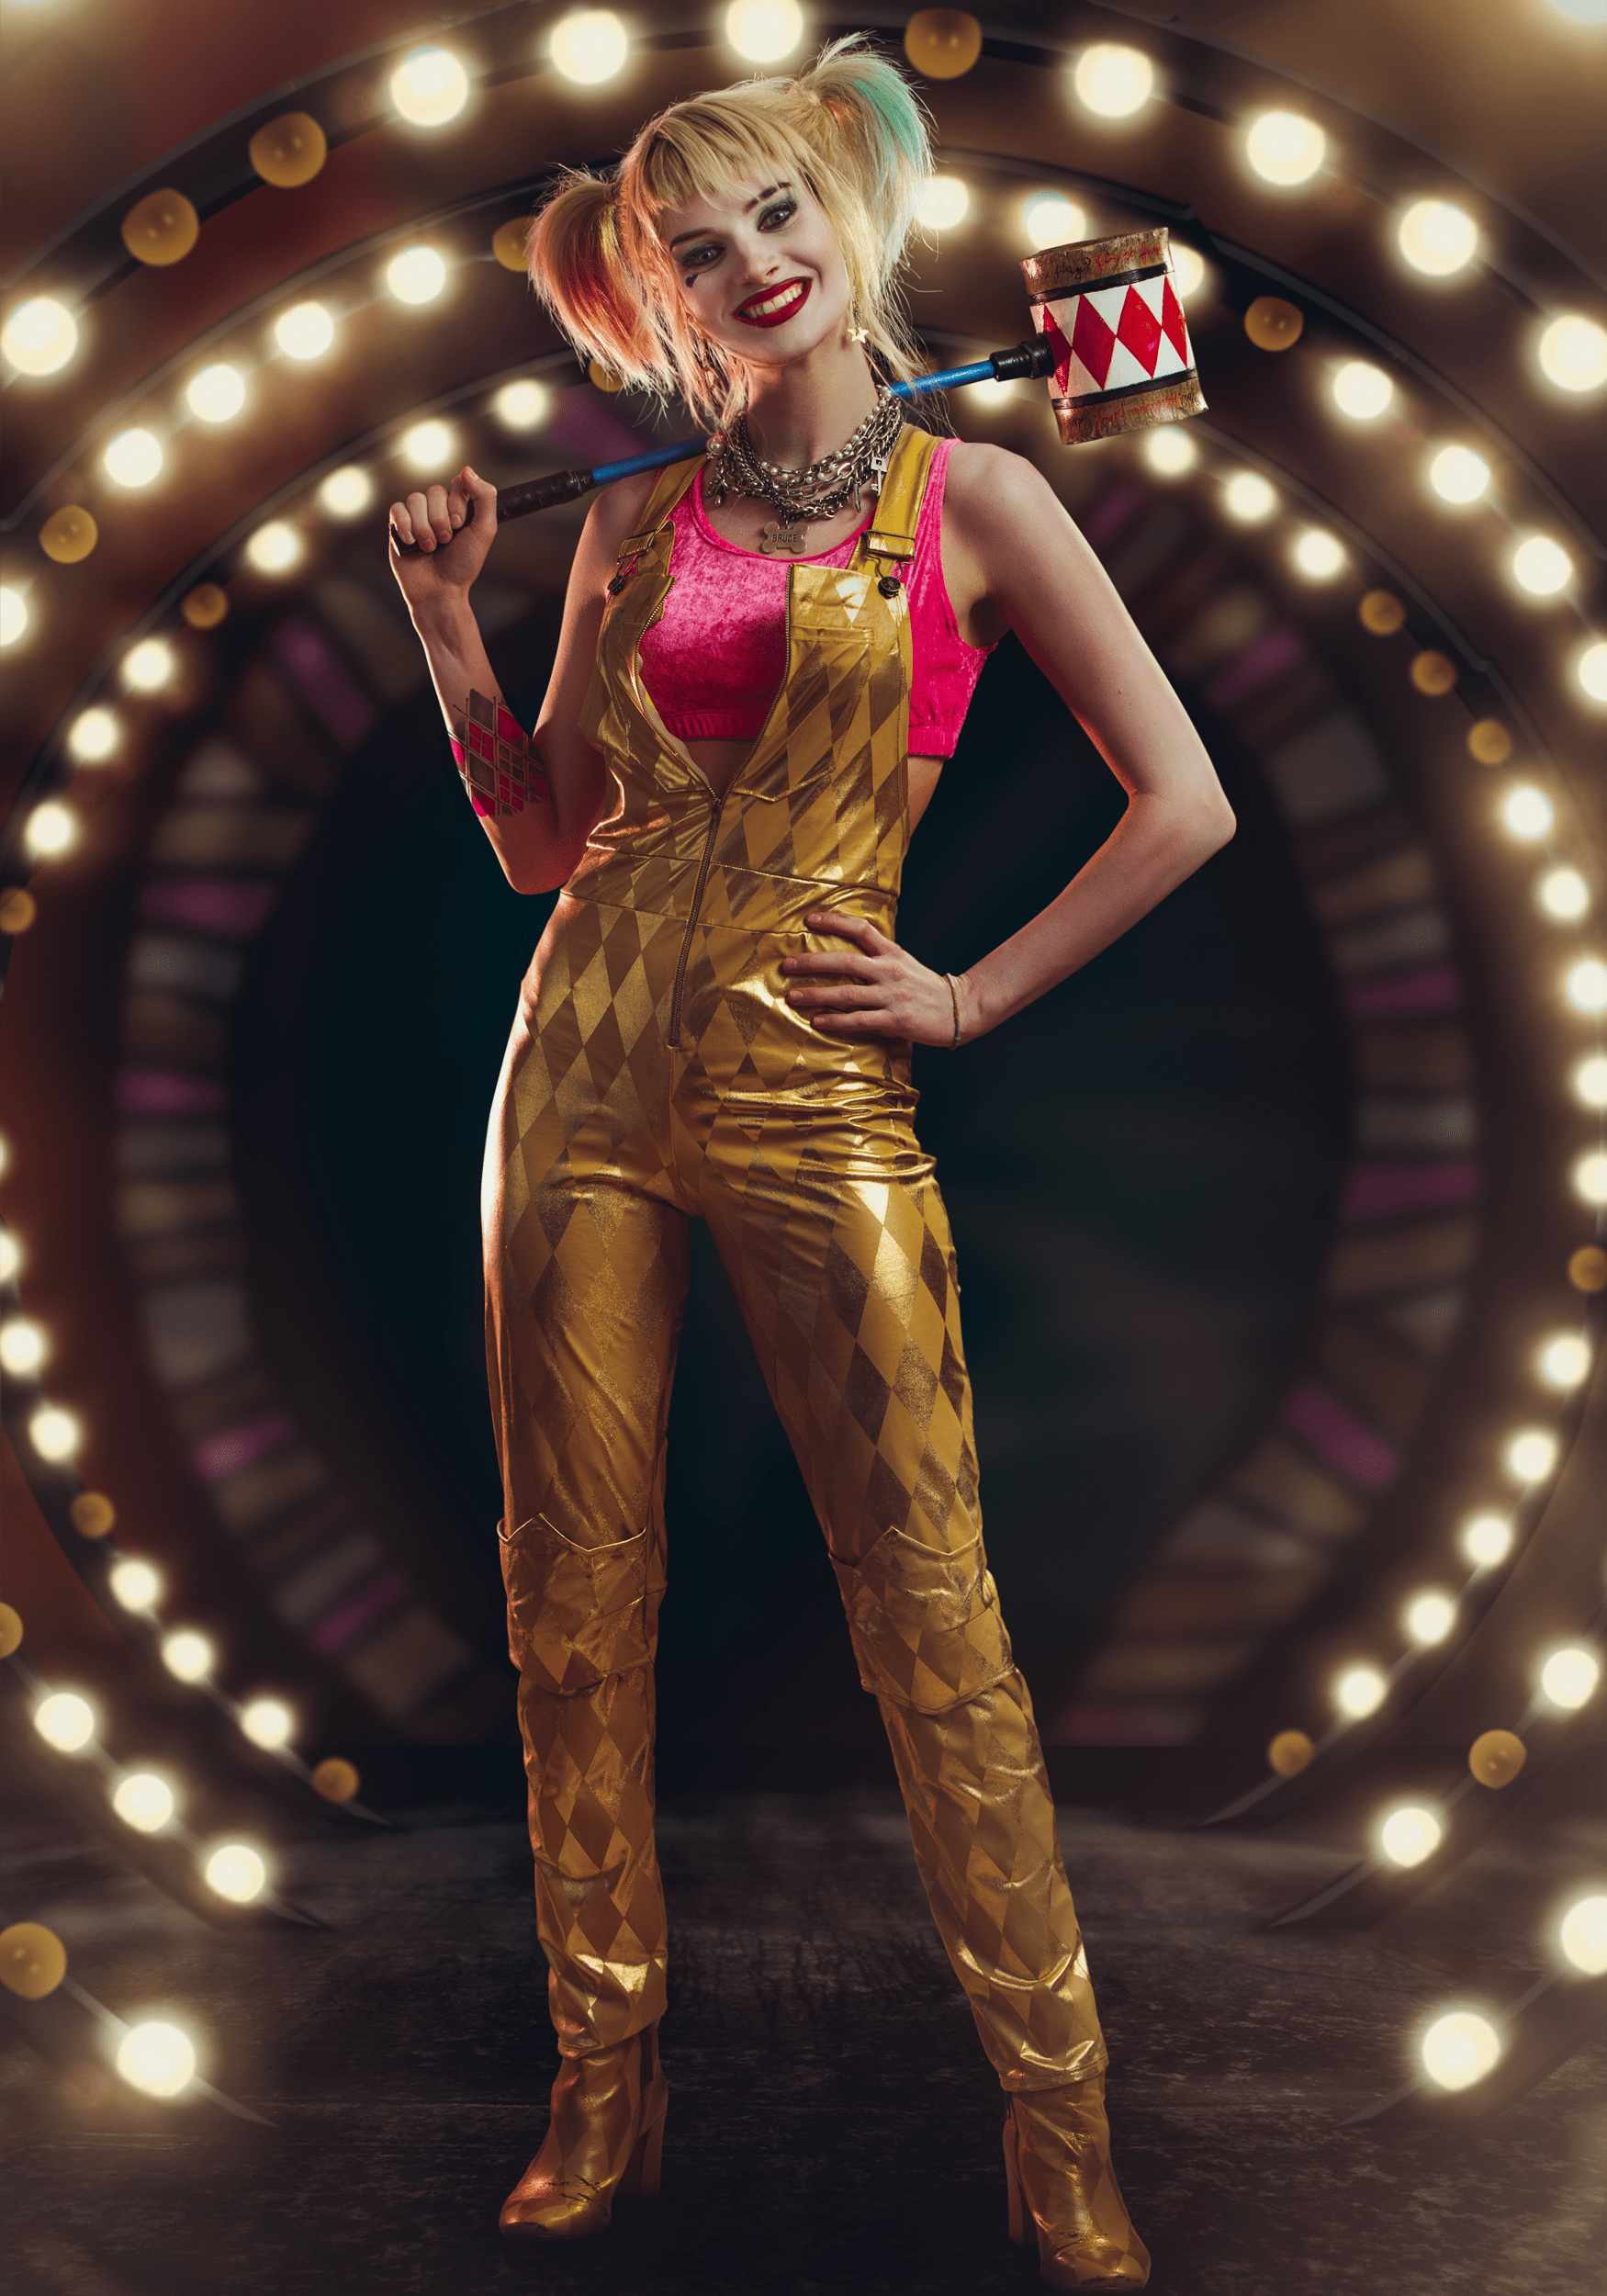 https://images.halloweencostumes.com/products/65157/1-1/womens-harley-quinn-gold-overalls-costume-main-update.png